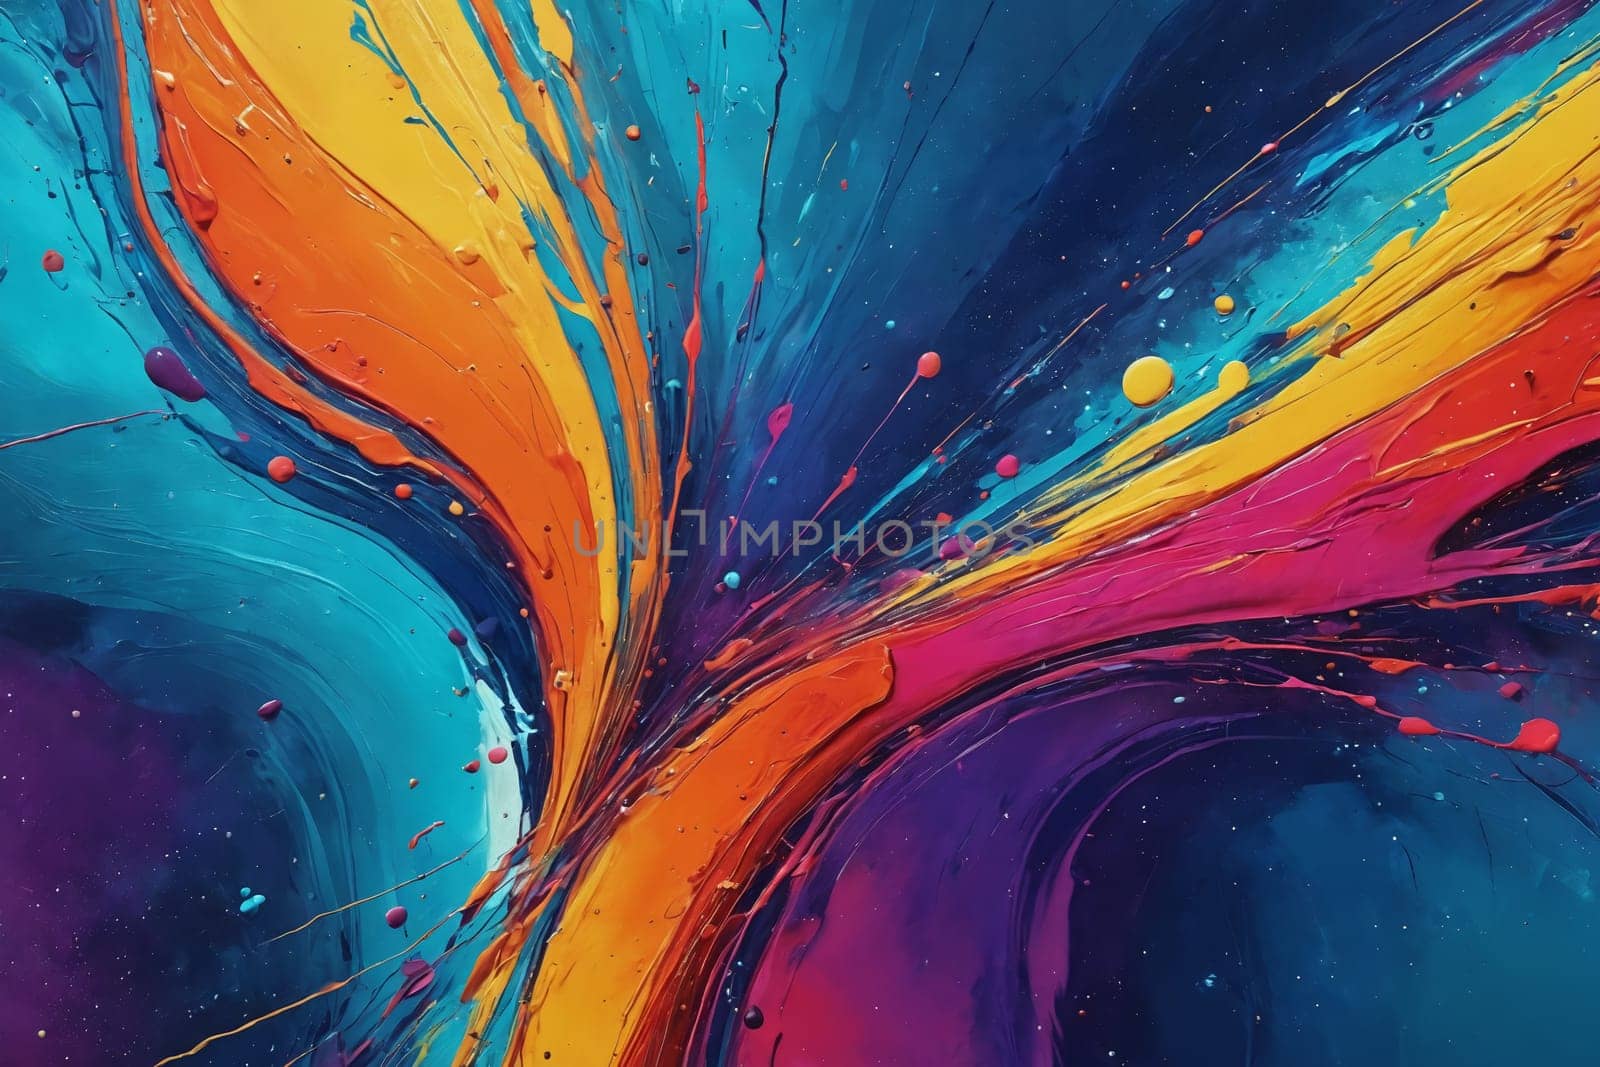 Experience an extreme close-up of a riotous splatter painting, flooding with energetic color splashes. Perfect for art lessons, abstract art discussions, or creative exploration blogs.